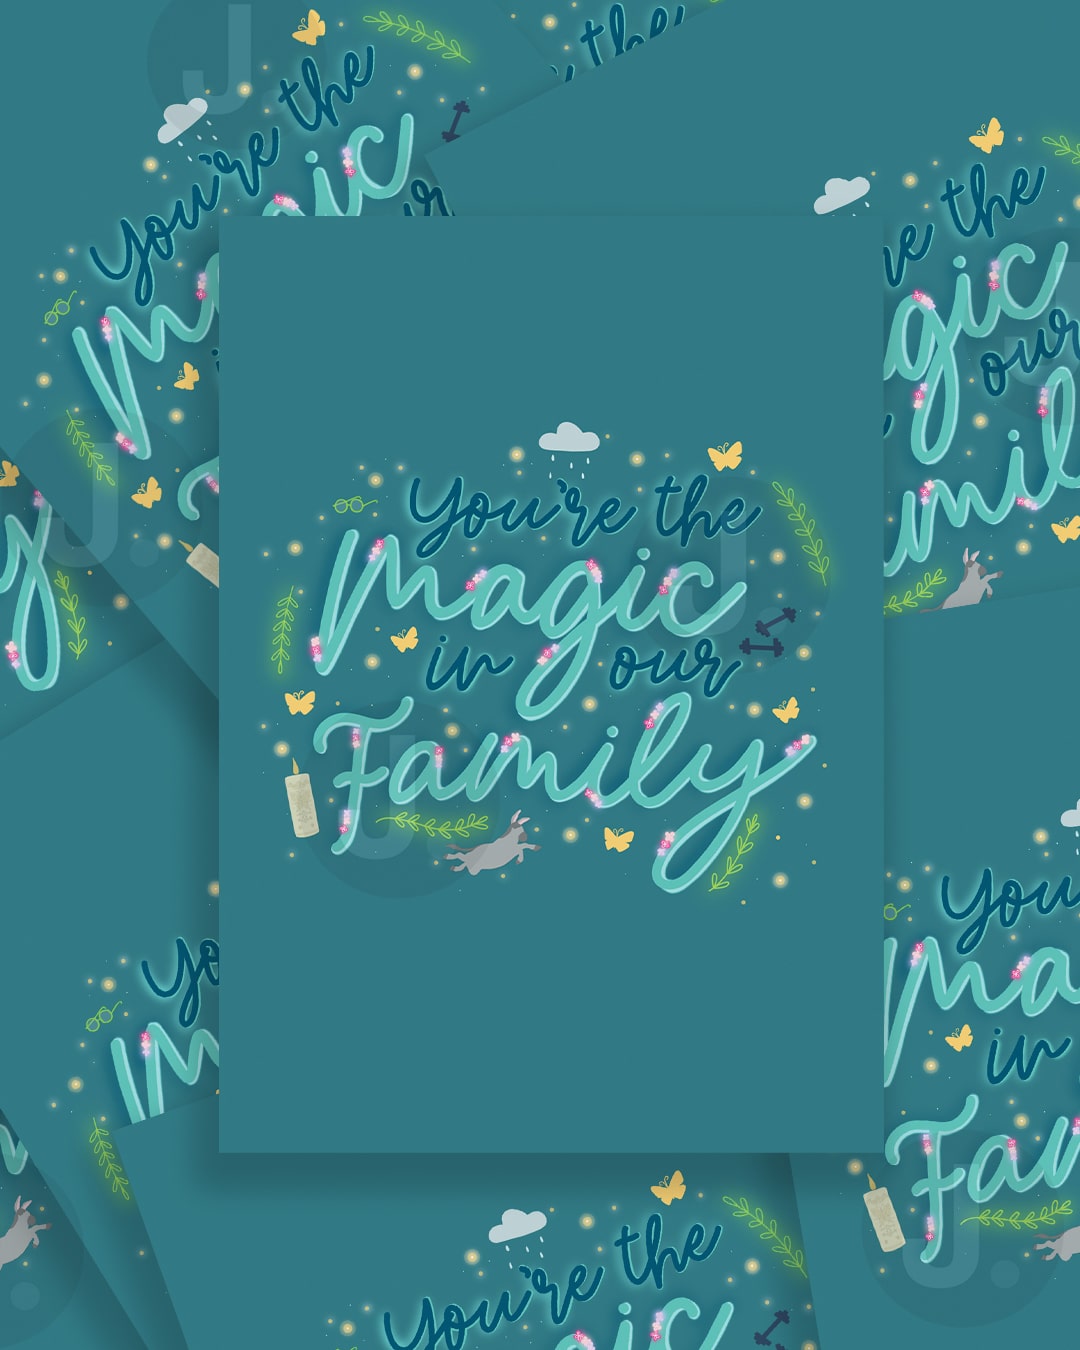 You're The Magic In Our Family Card - Magical Madrigal Encanto Inspired Card - Encanto Inspired Card